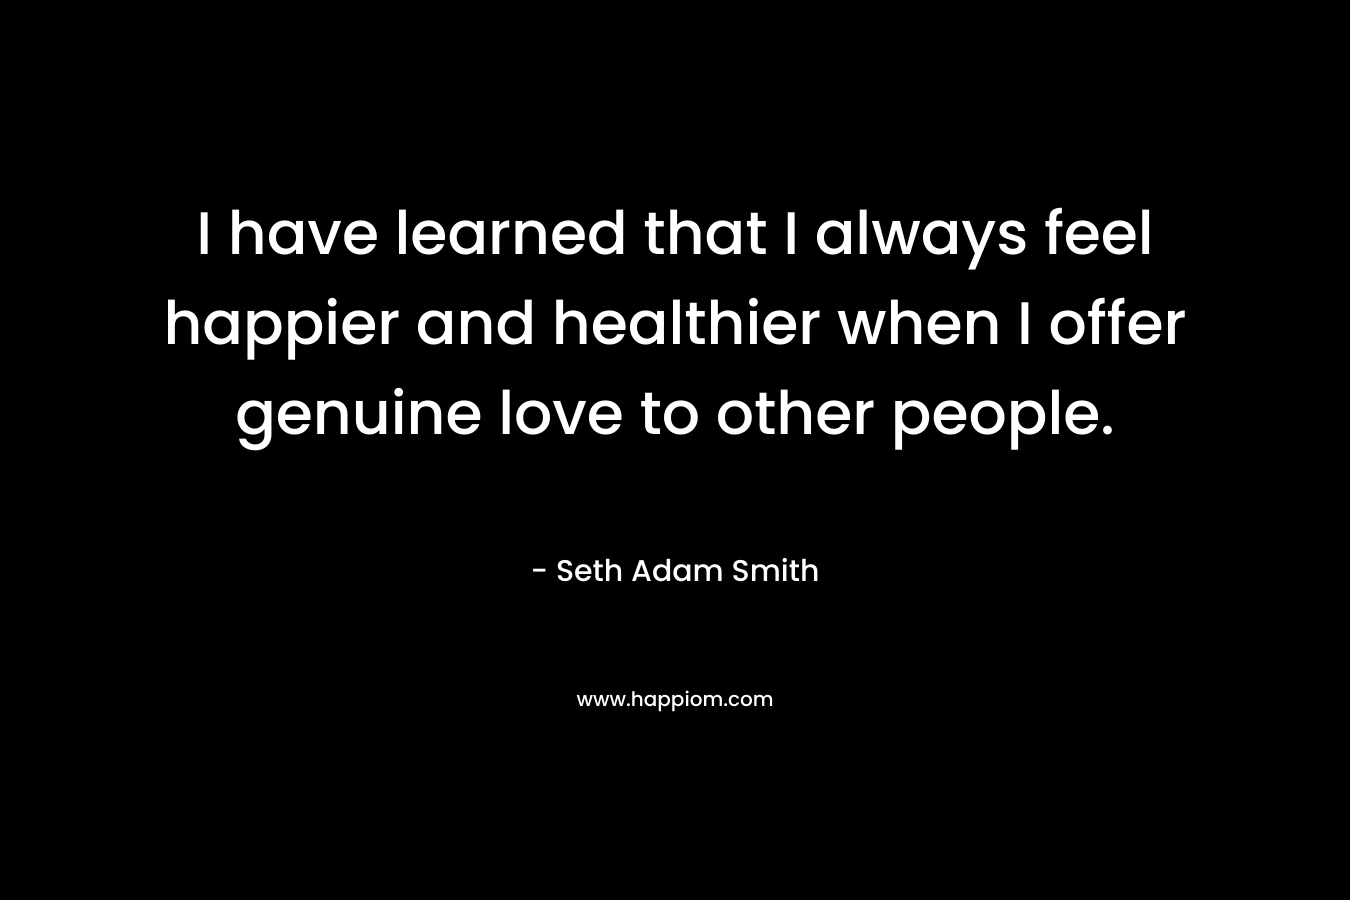 I have learned that I always feel happier and healthier when I offer genuine love to other people.